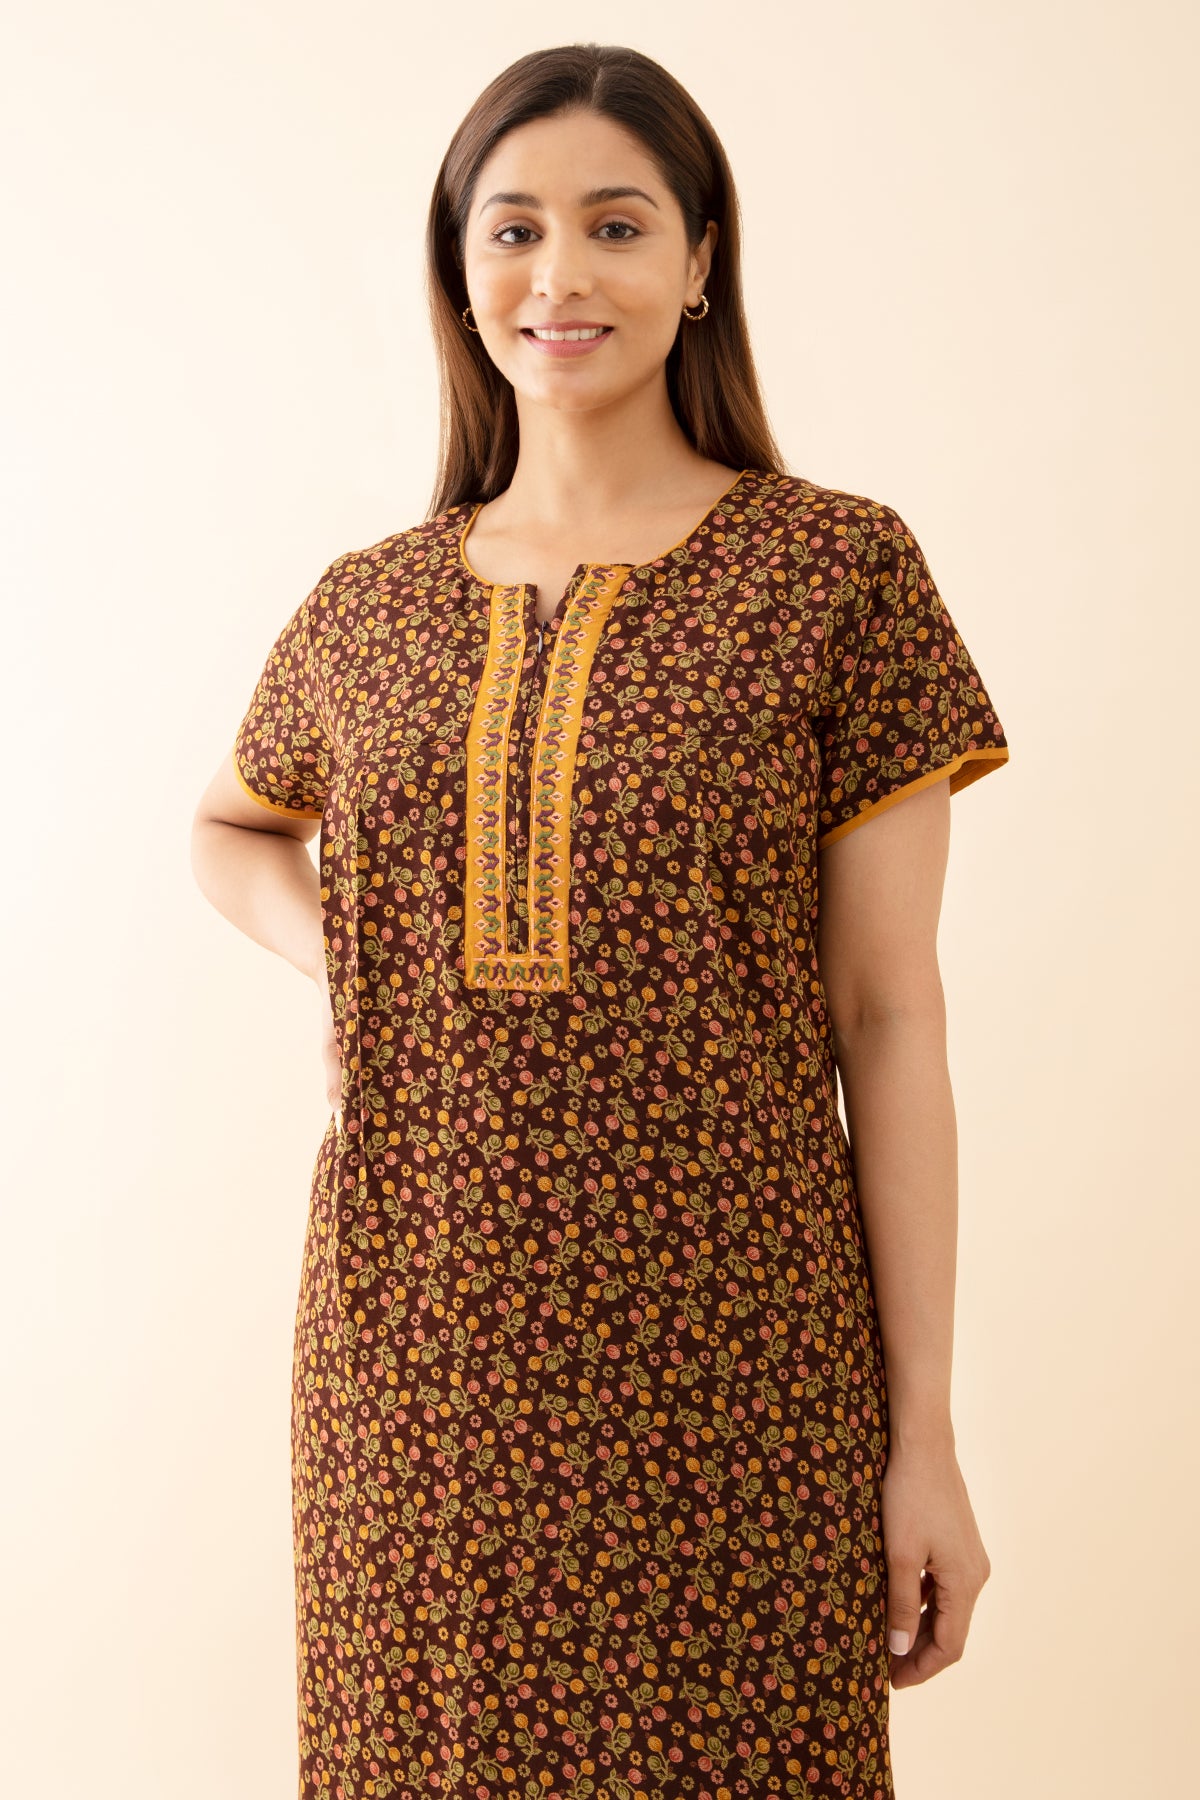 Tulip Floral Printed with Contrast Embroidered Yoke Brown